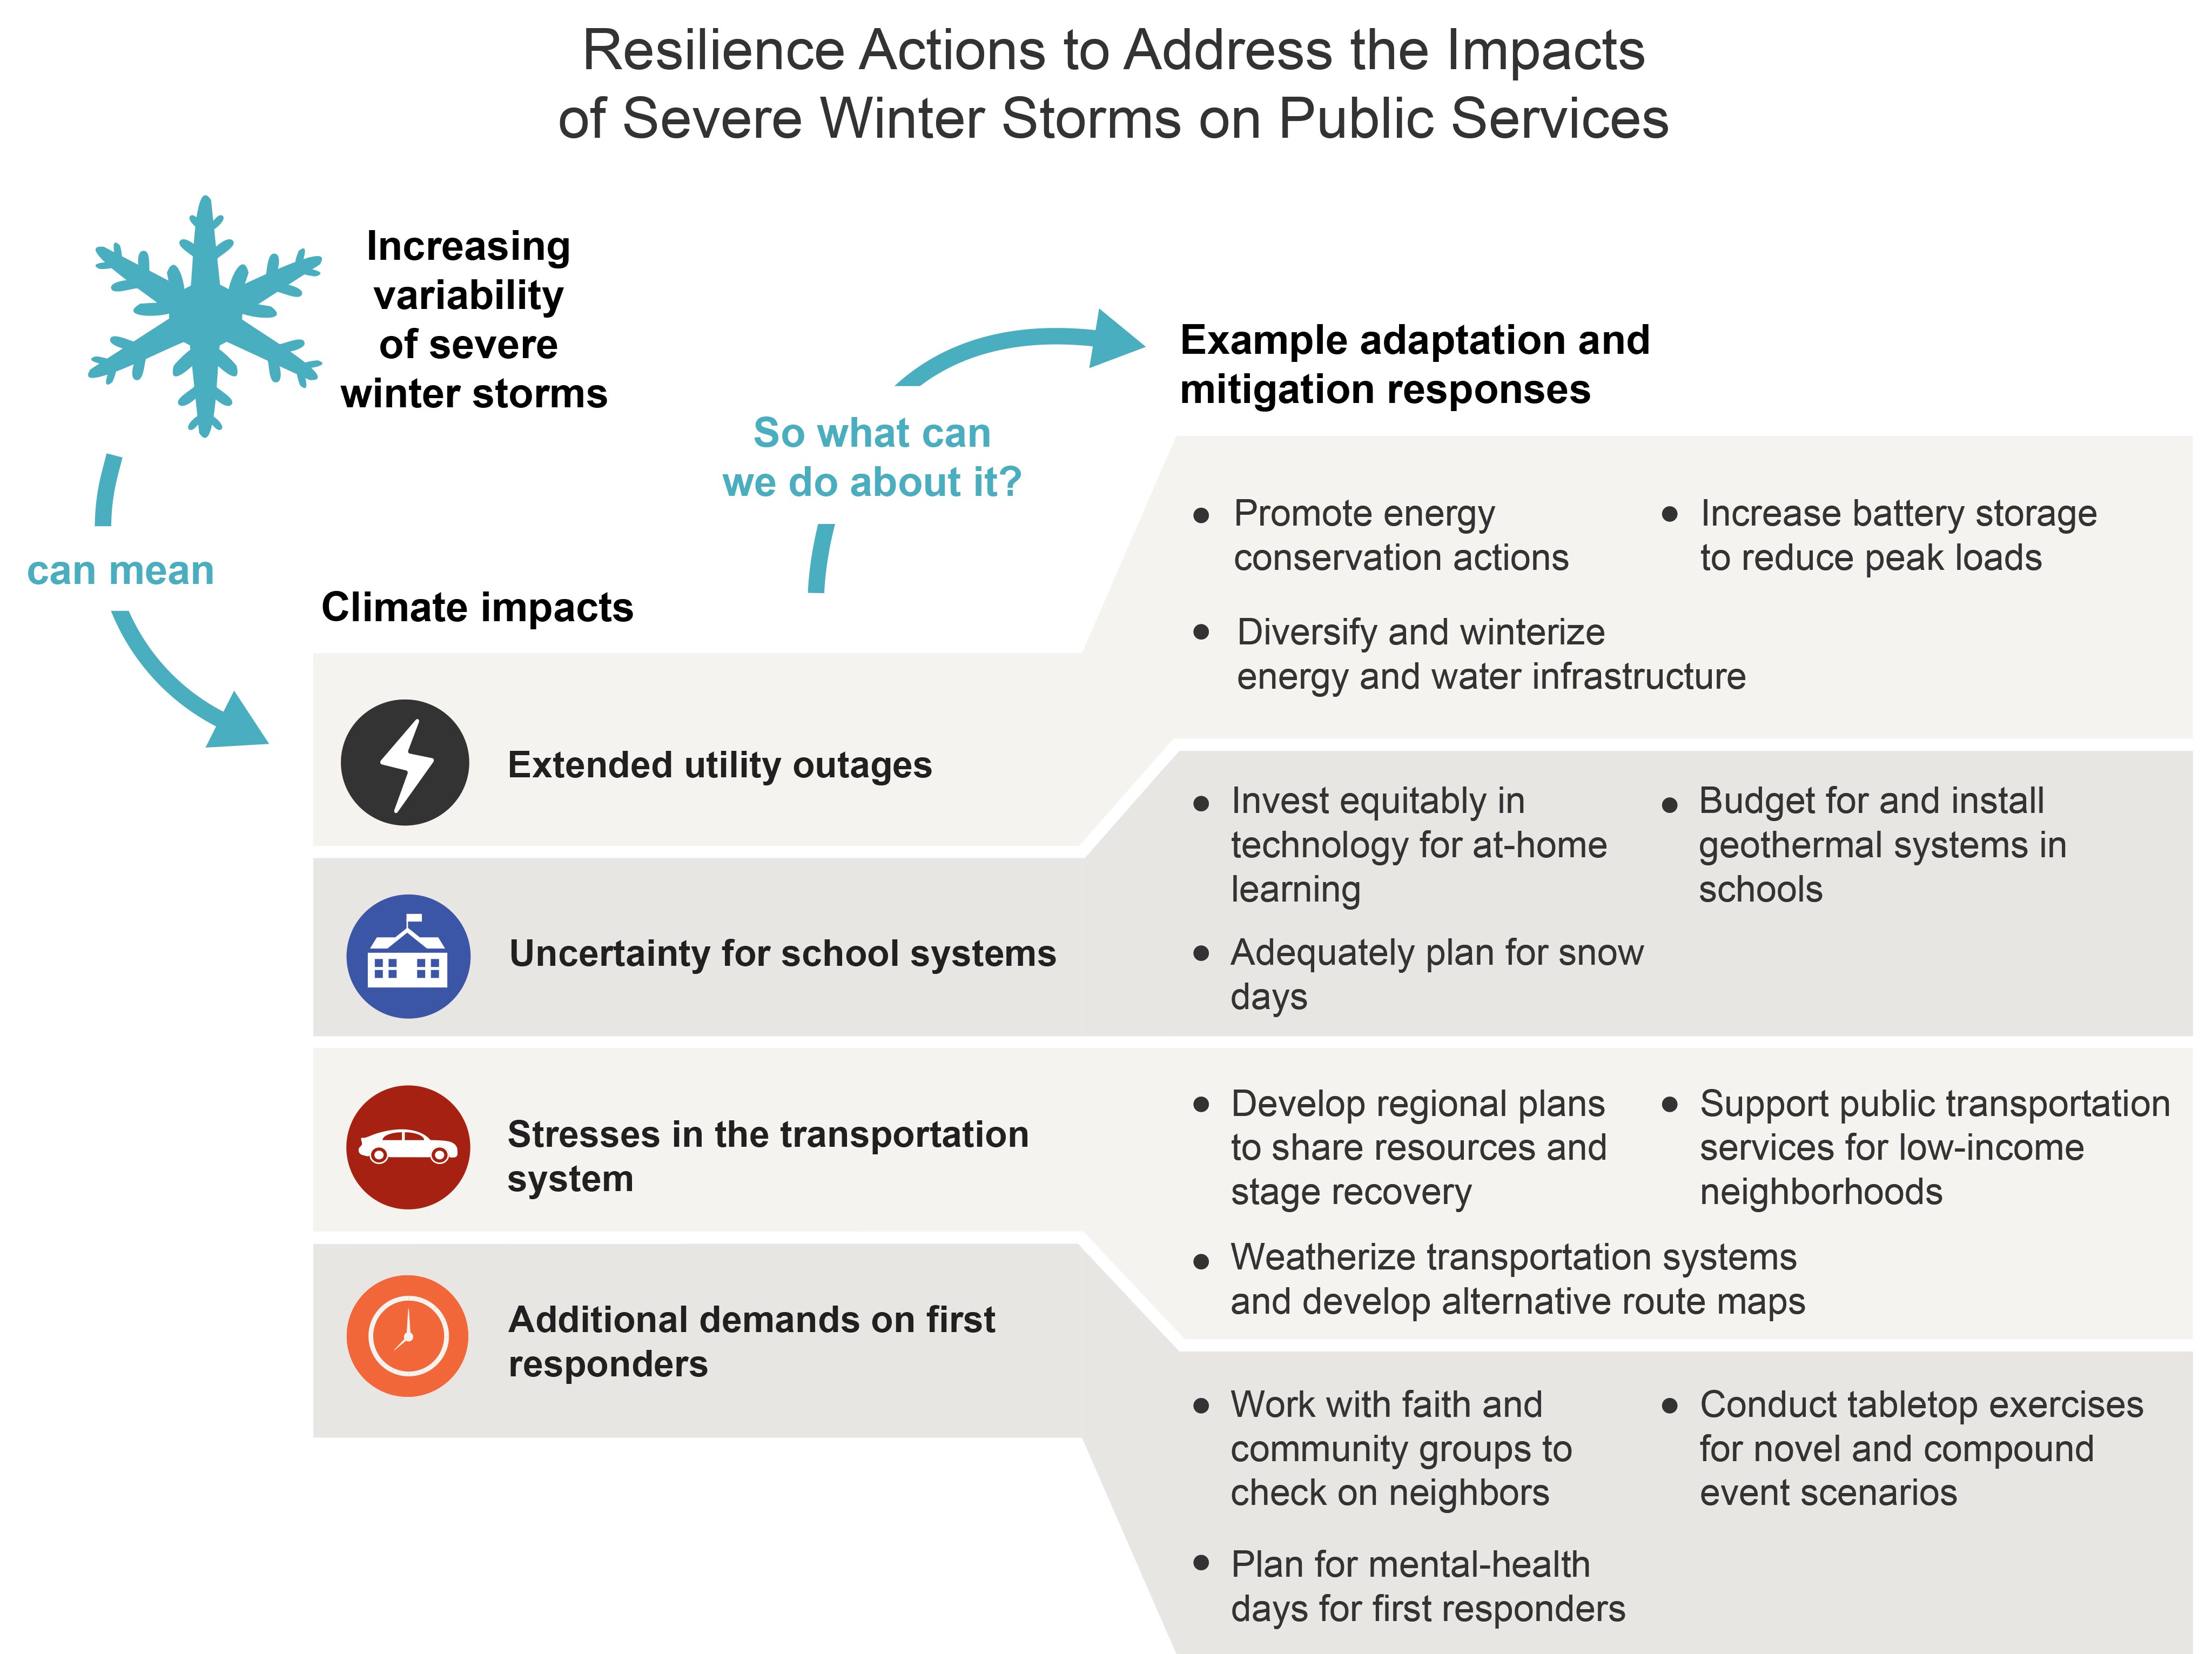 Resilience Actions to Address the Impacts of Severe Winter Storms on Public Services